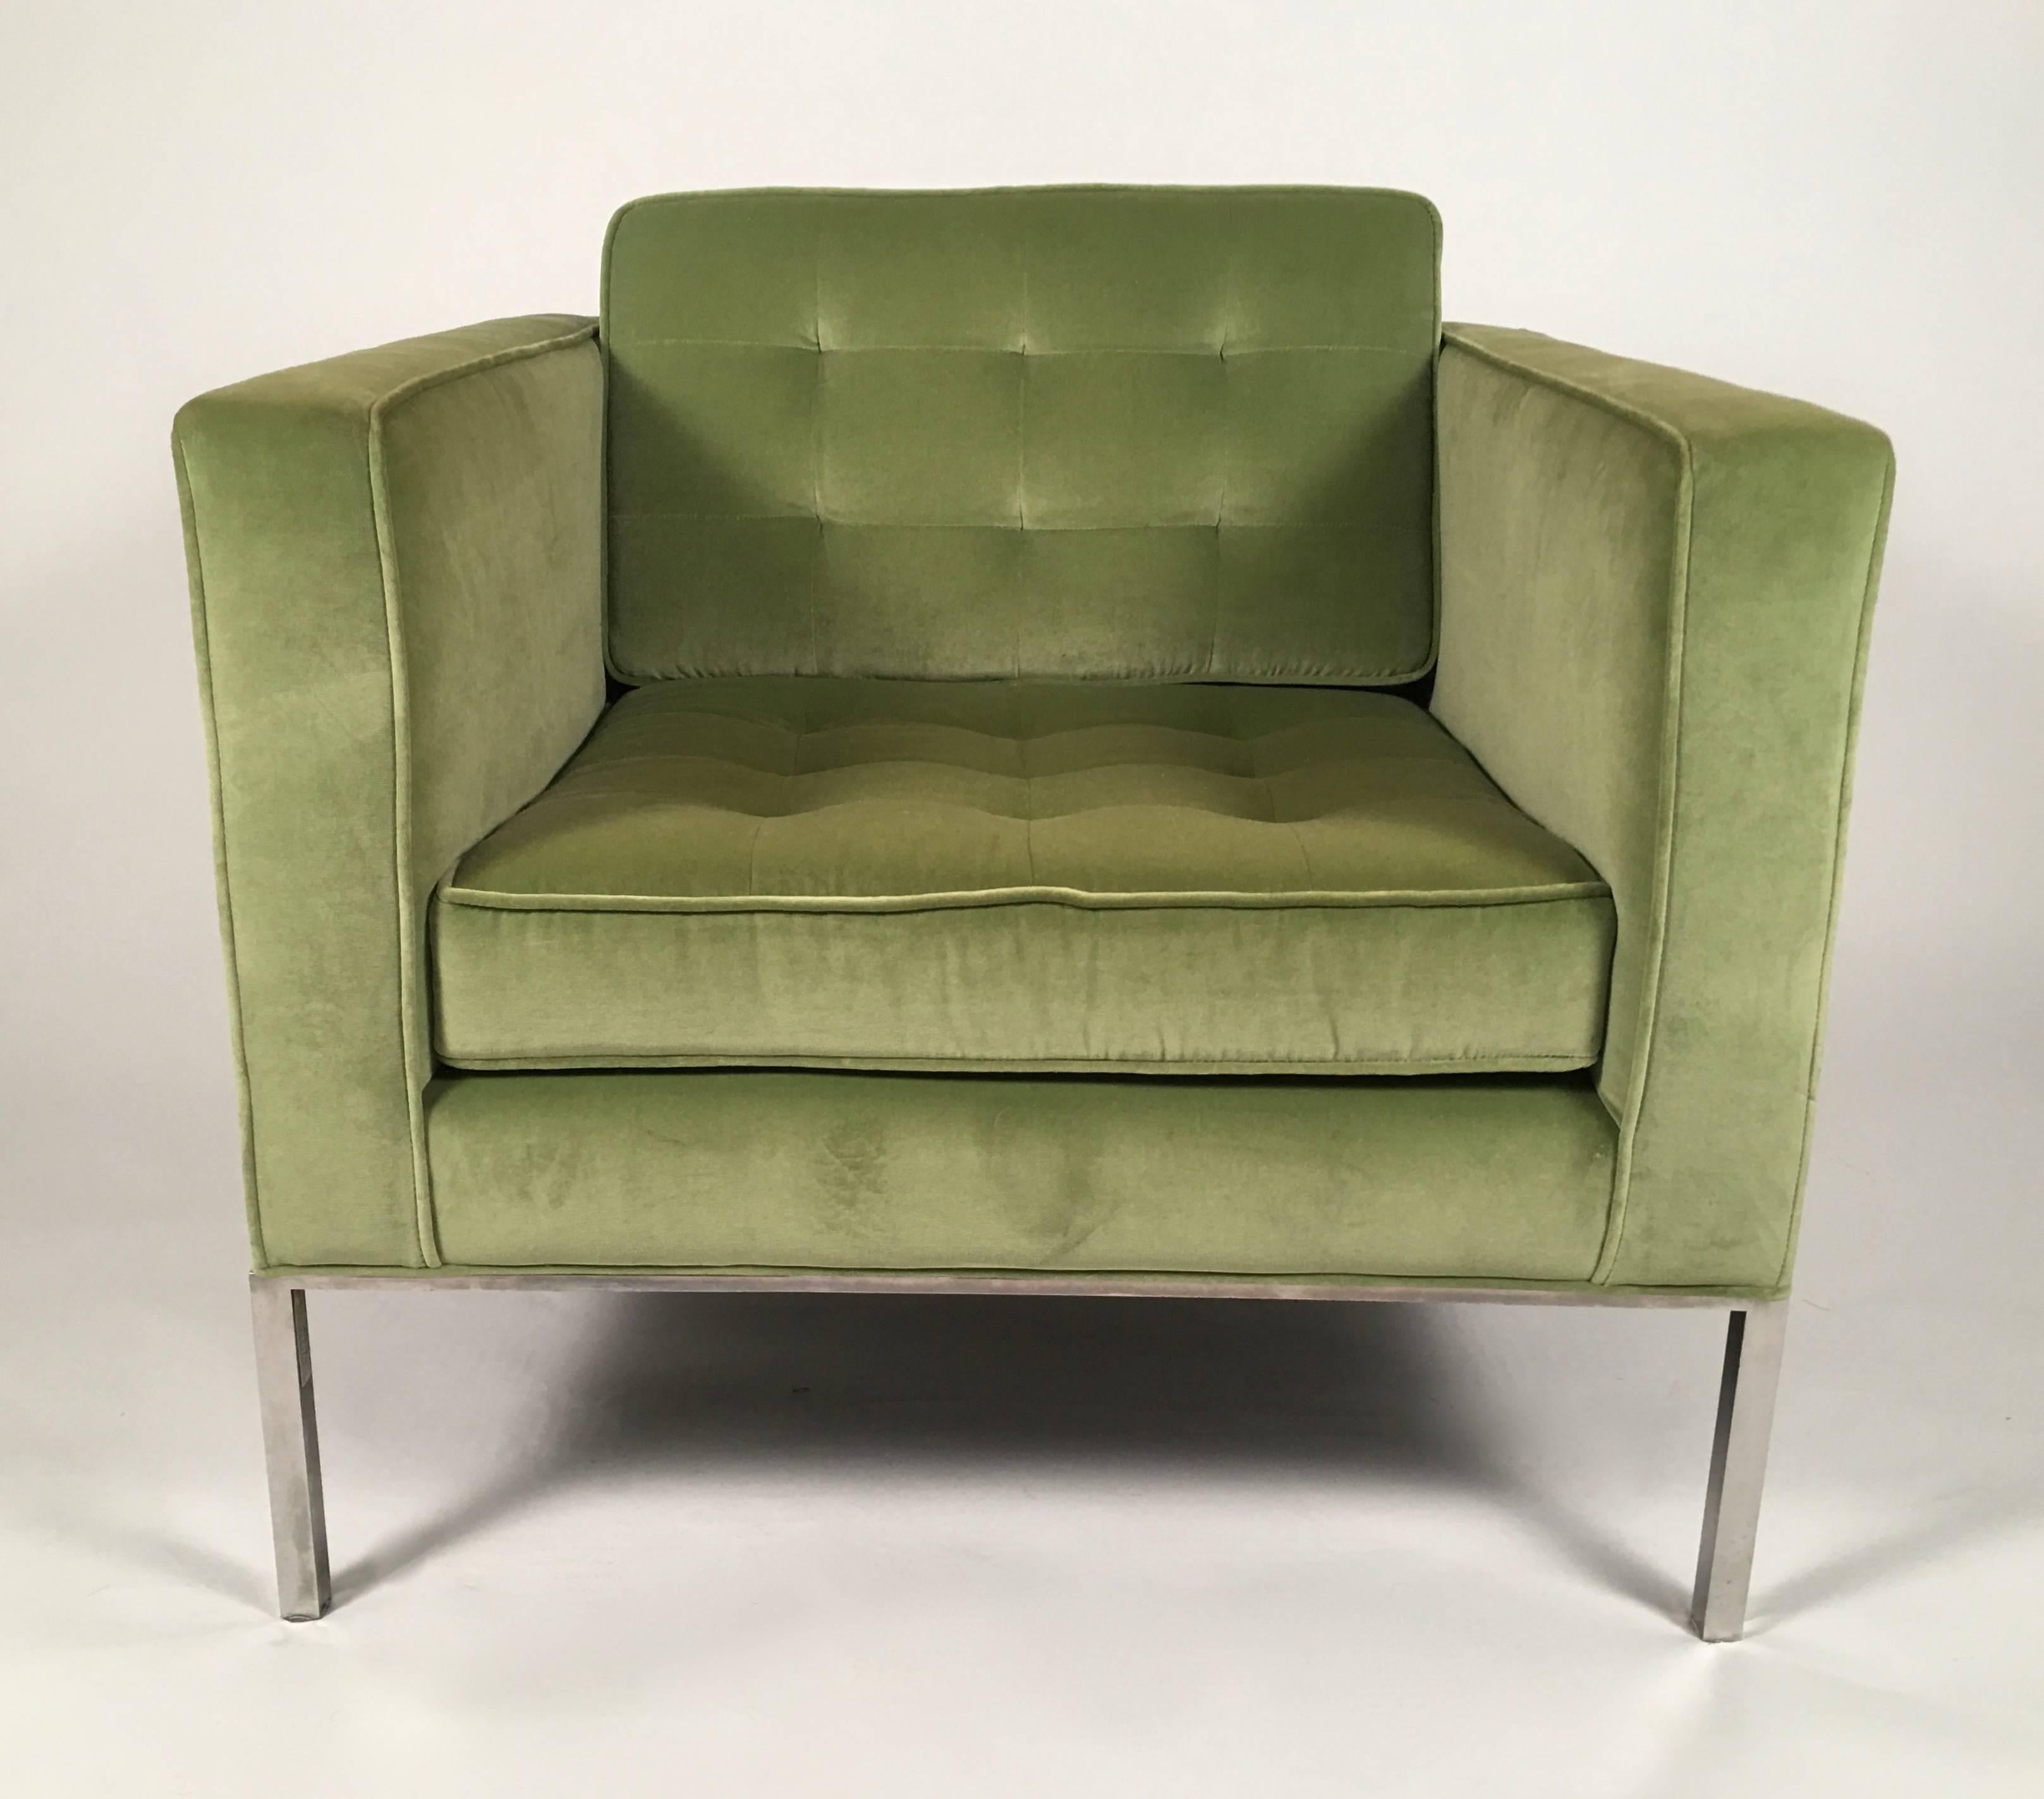 An original pair of Florence Knoll lounge chairs, designed in 1954, of square form, with loose tufted back and seat cushions, raised on exposed metal frame and legs in heavy gauge steel with polished chrome finish. Upholstered in high quality moss